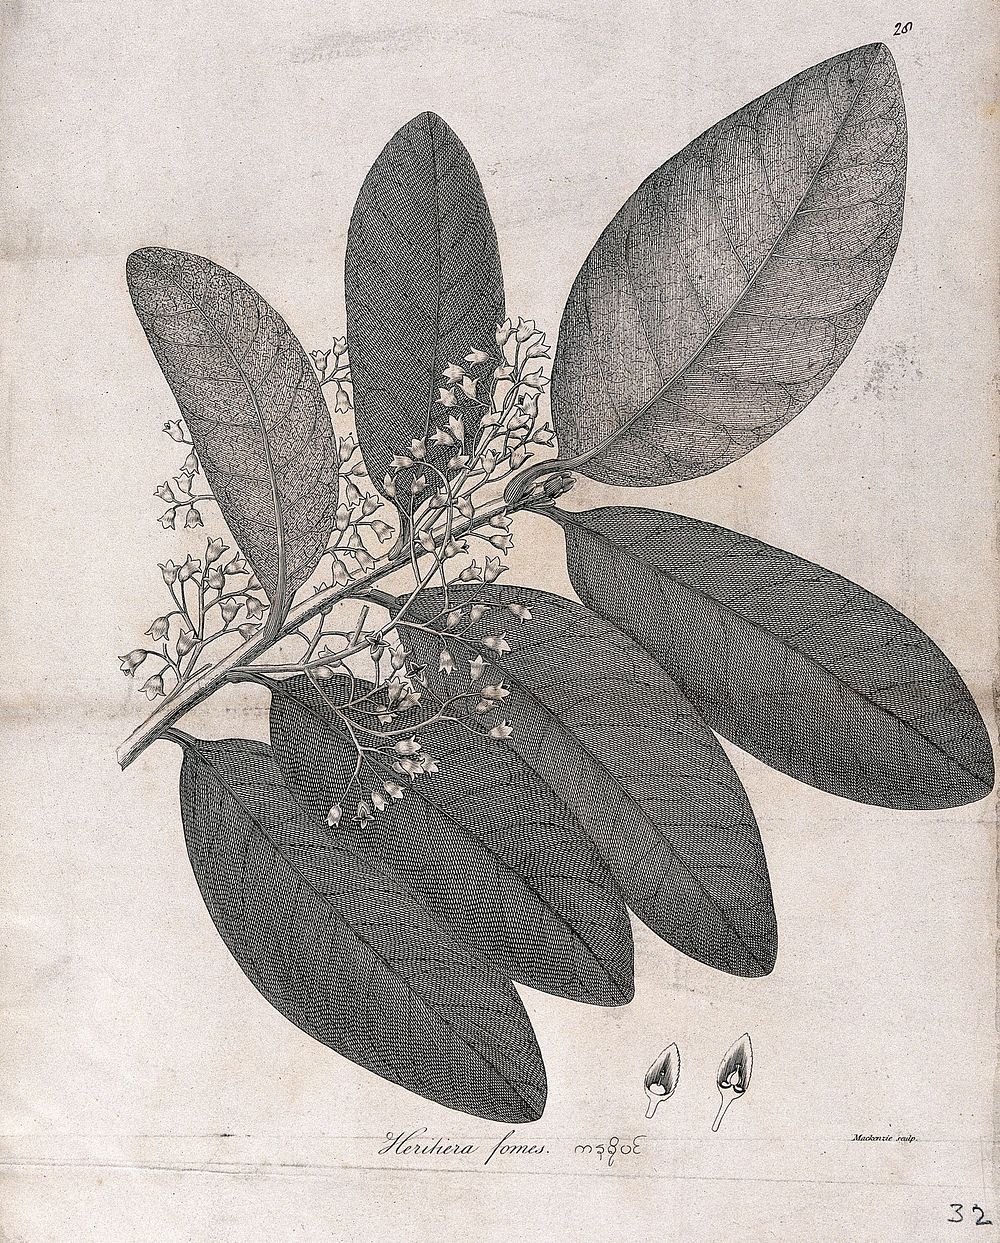 Heritiera fomes: flowering stem with floral segments. Line engraving by Mackenzie, c.1795.